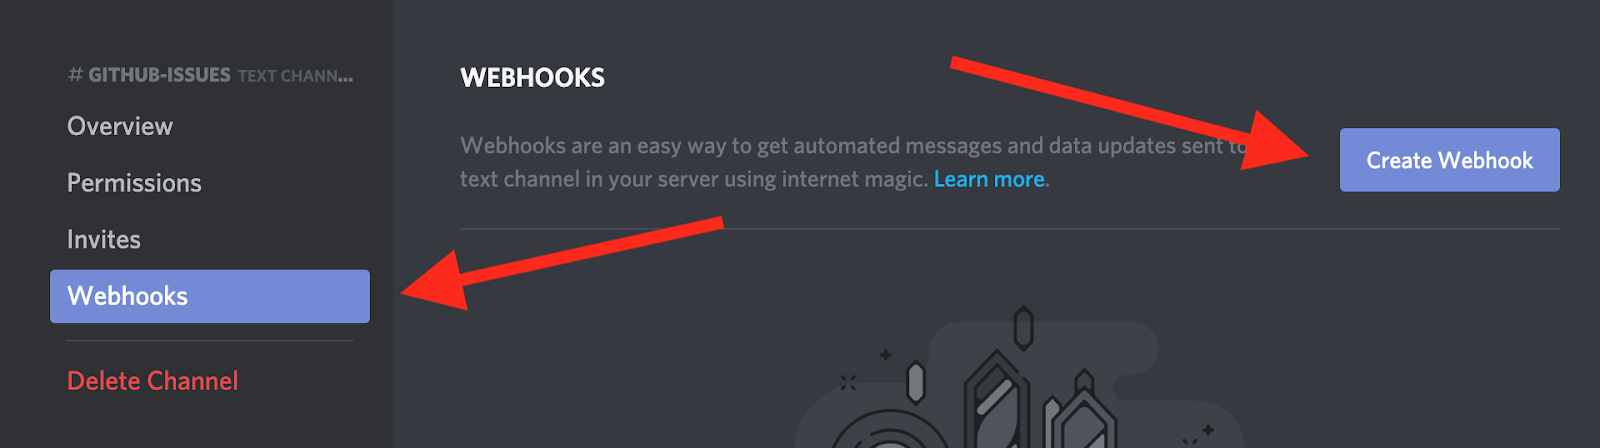 Github Discord Delete Messages